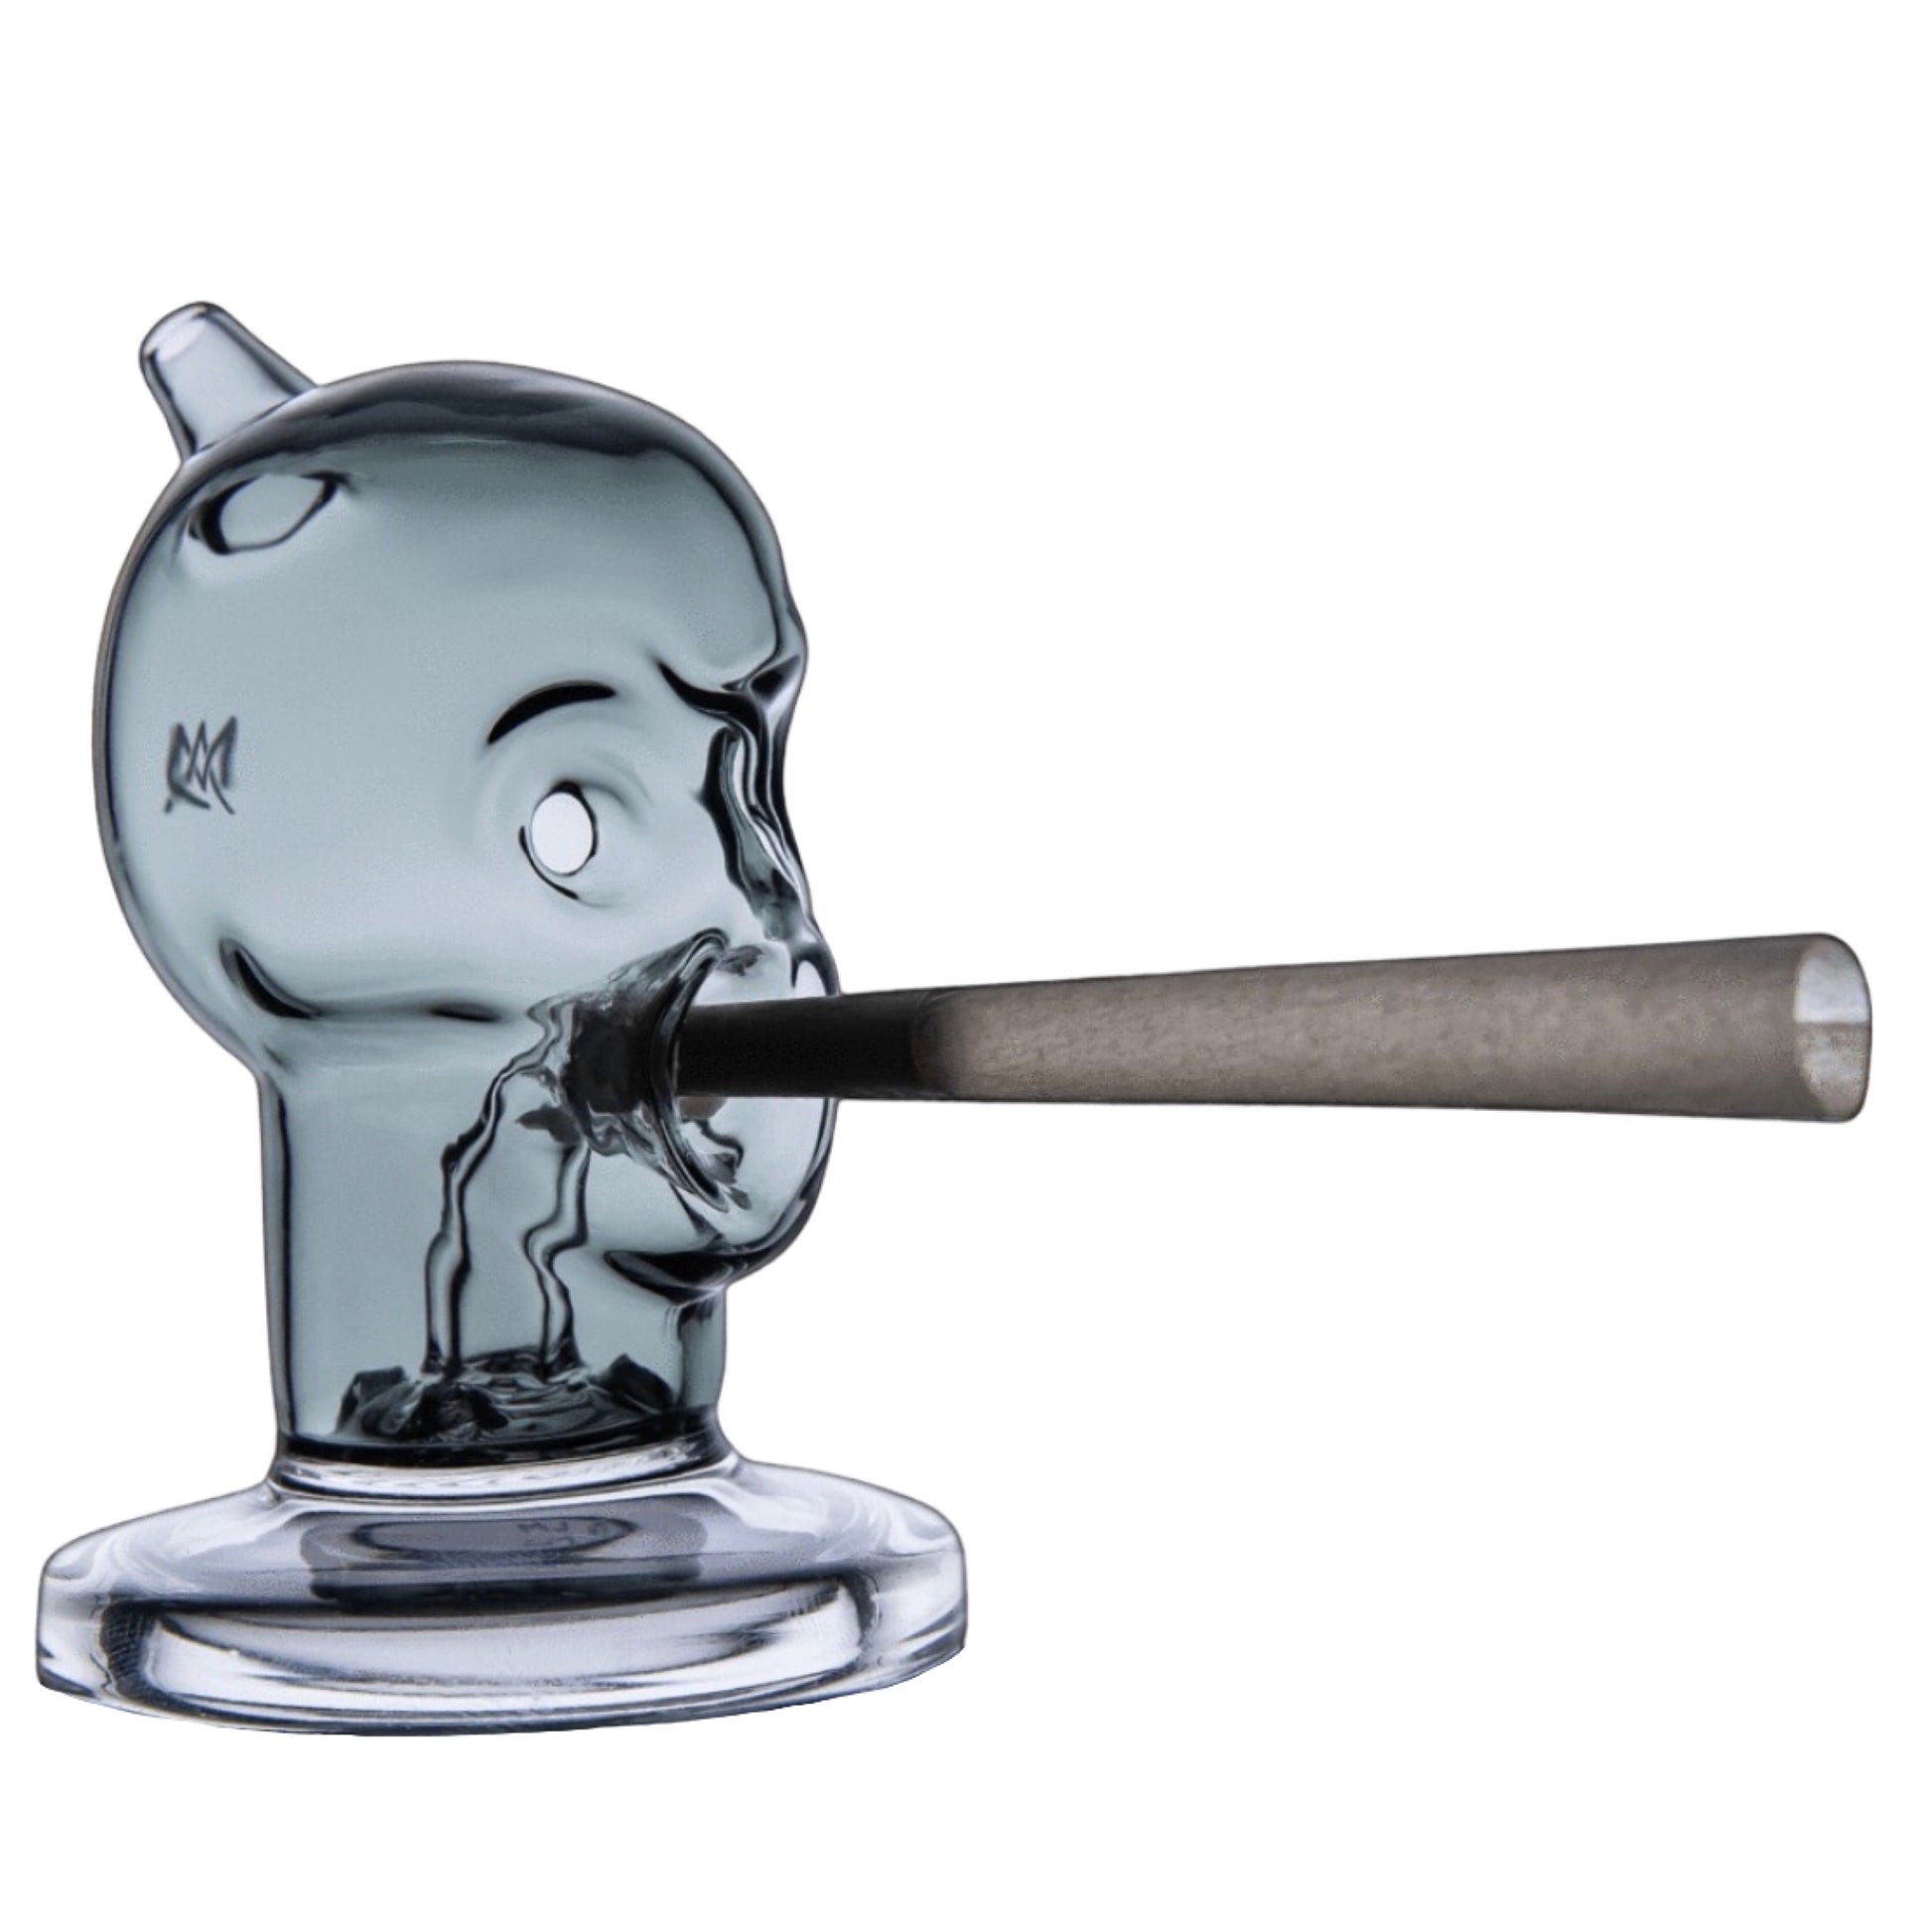 MJ Arsenal Limited Edition Rip'r Blunt Bubbler 💀 by MJ Arsenal | Mission Dispensary